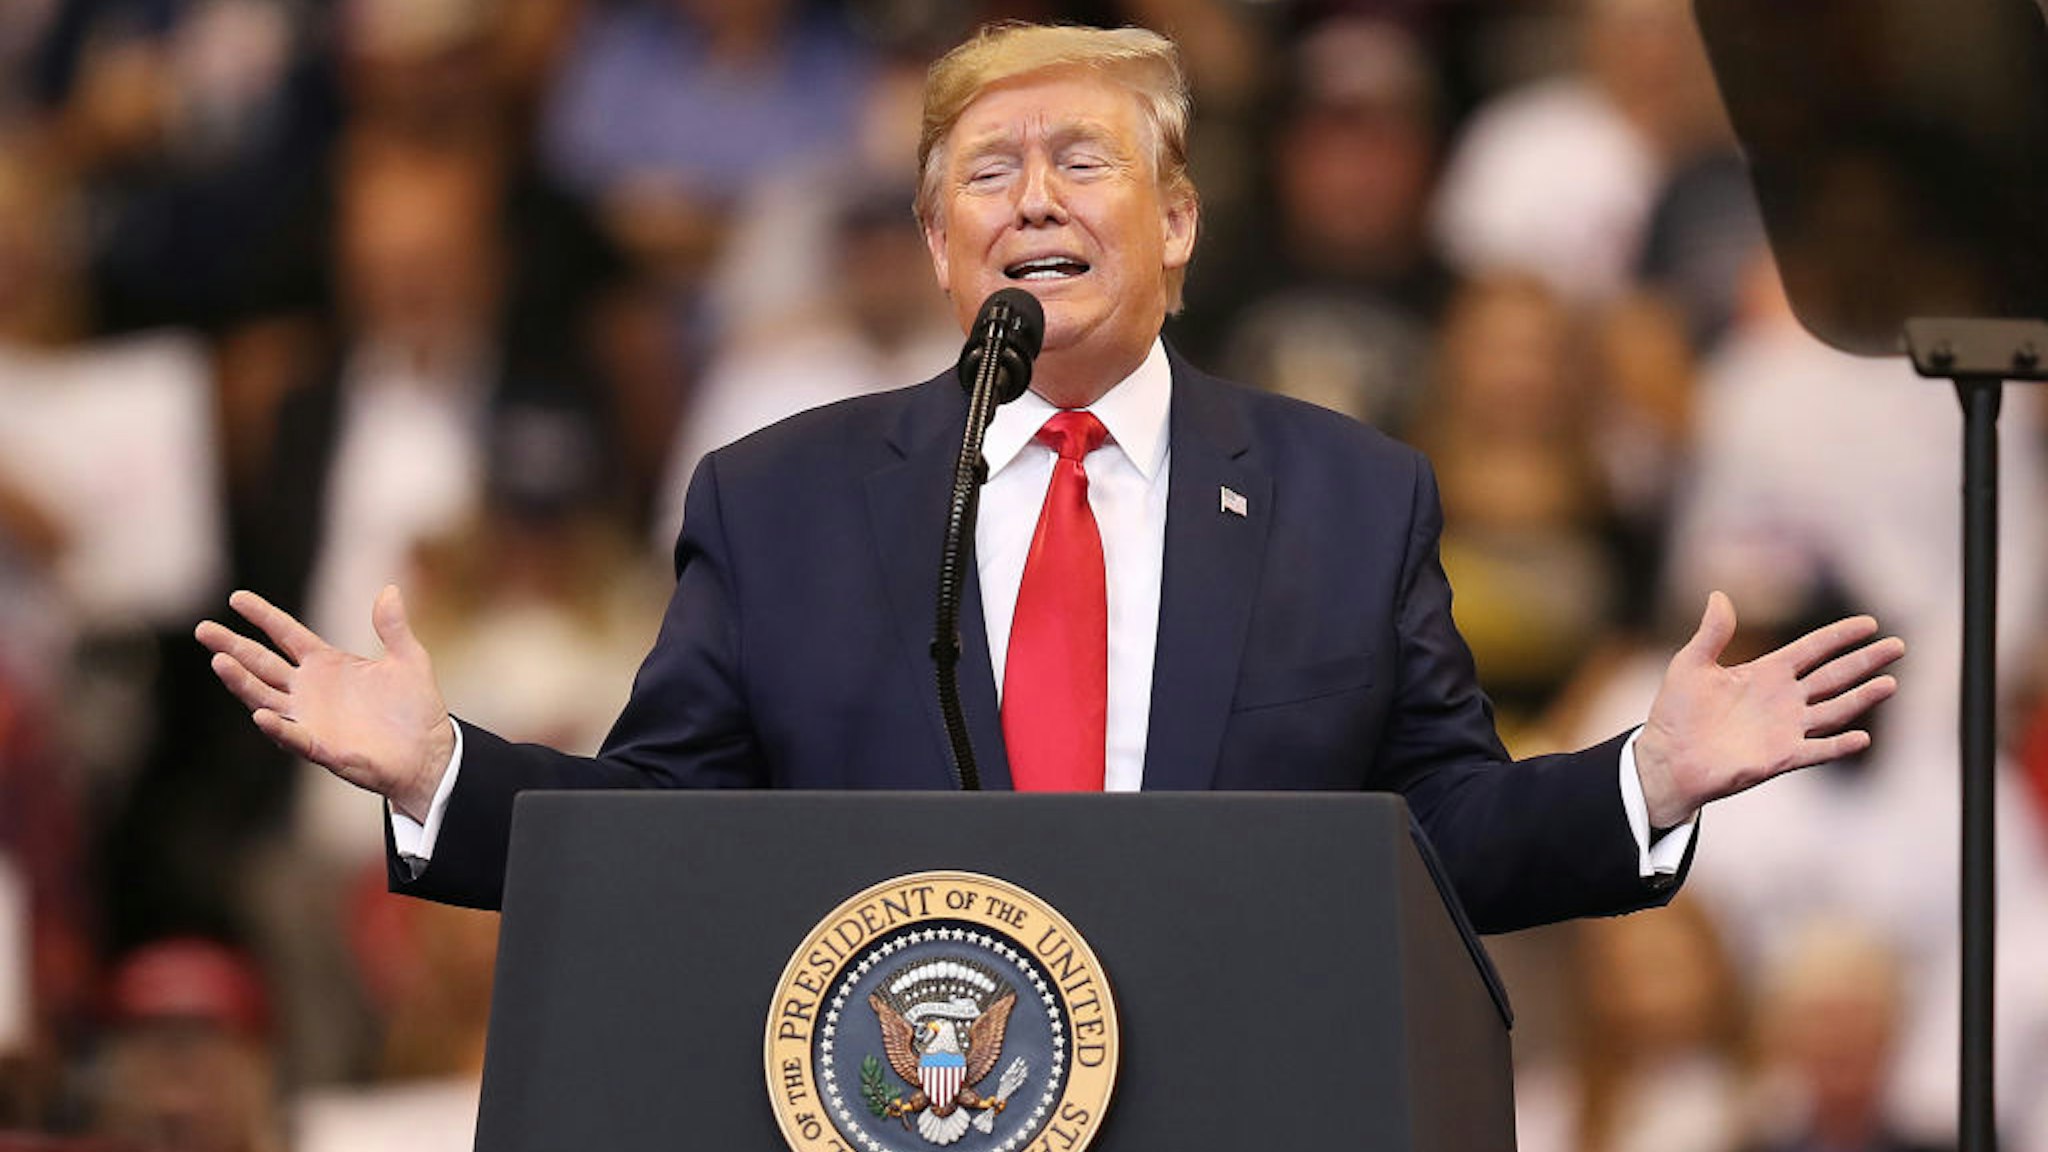 U.S. President Donald Trump speaks during a homecoming campaign rally at the BB&amp;T Center on November 26, 2019 in Sunrise, Florida. President Trump continues to campaign for re-election in the 2020 presidential race. )